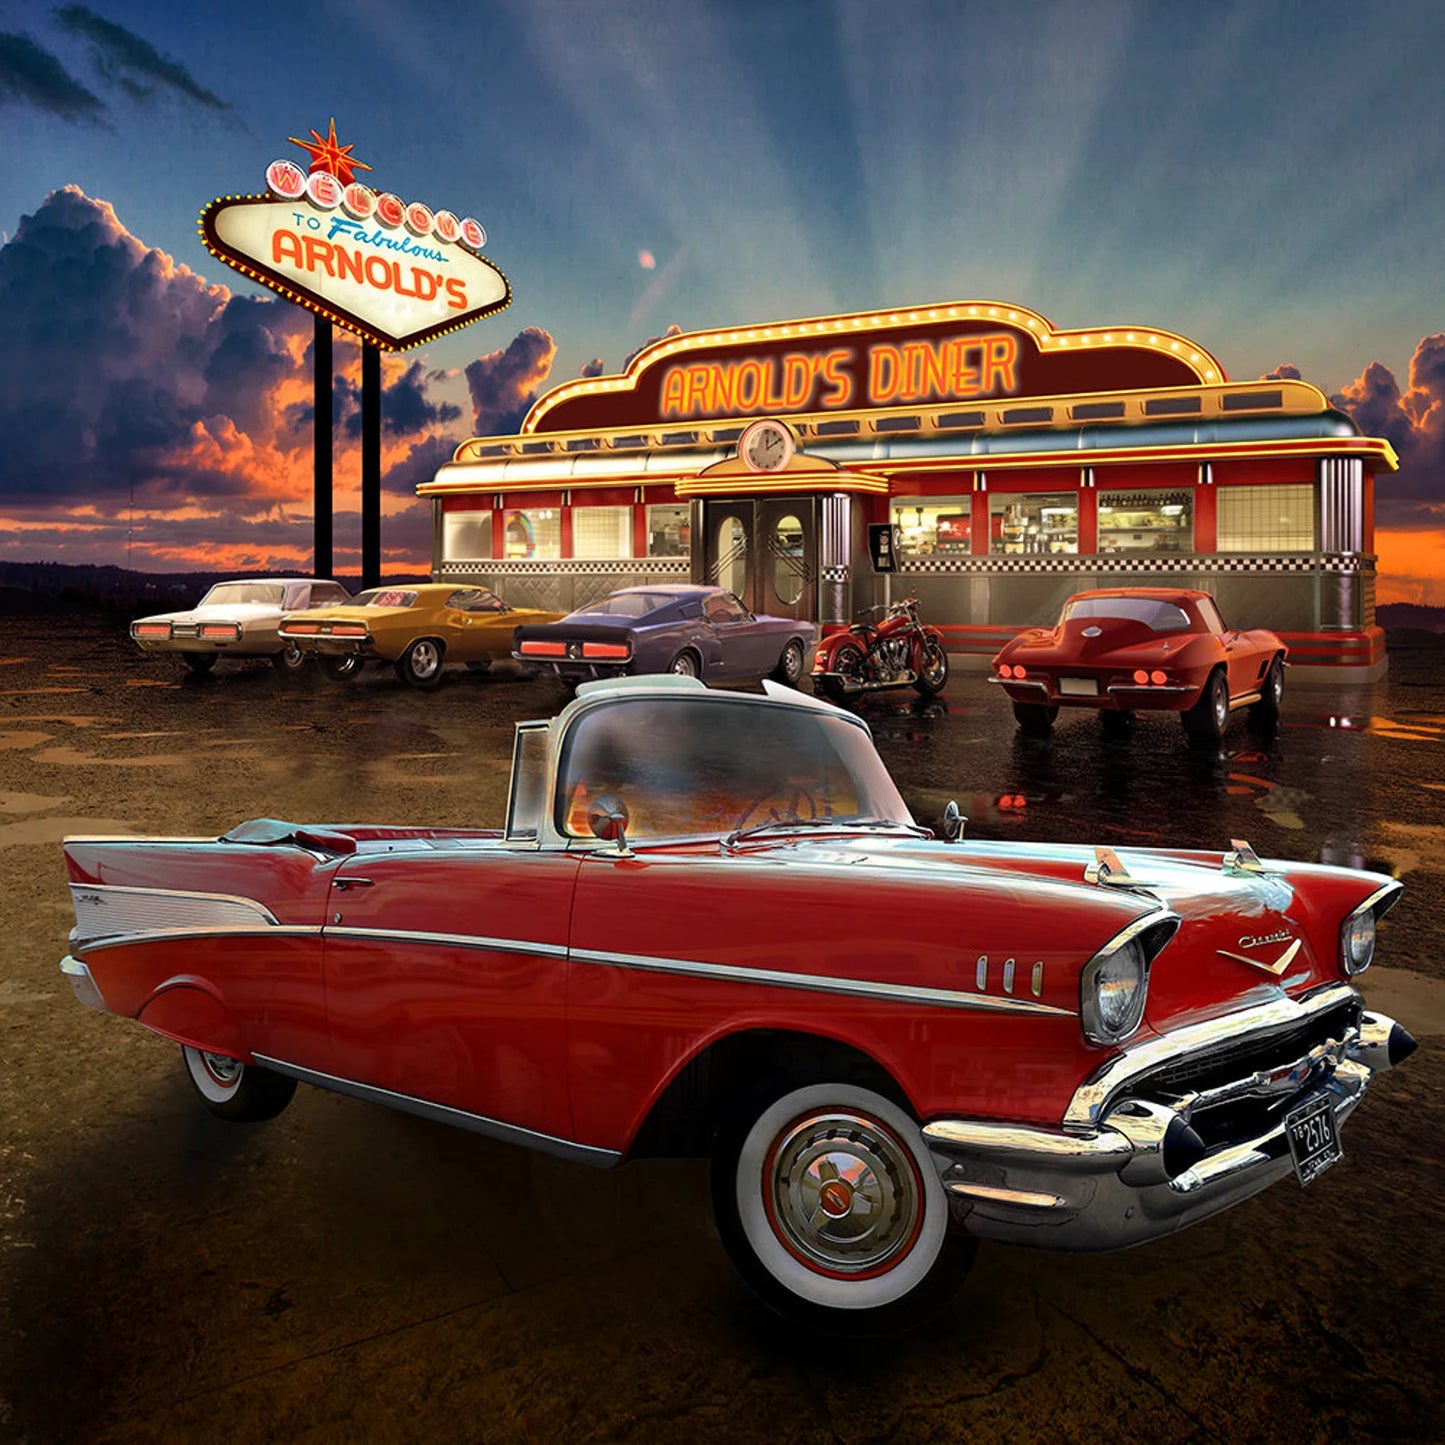 Red 57 Chevy Diner Photo Backdrop - Basic 10  x 8  